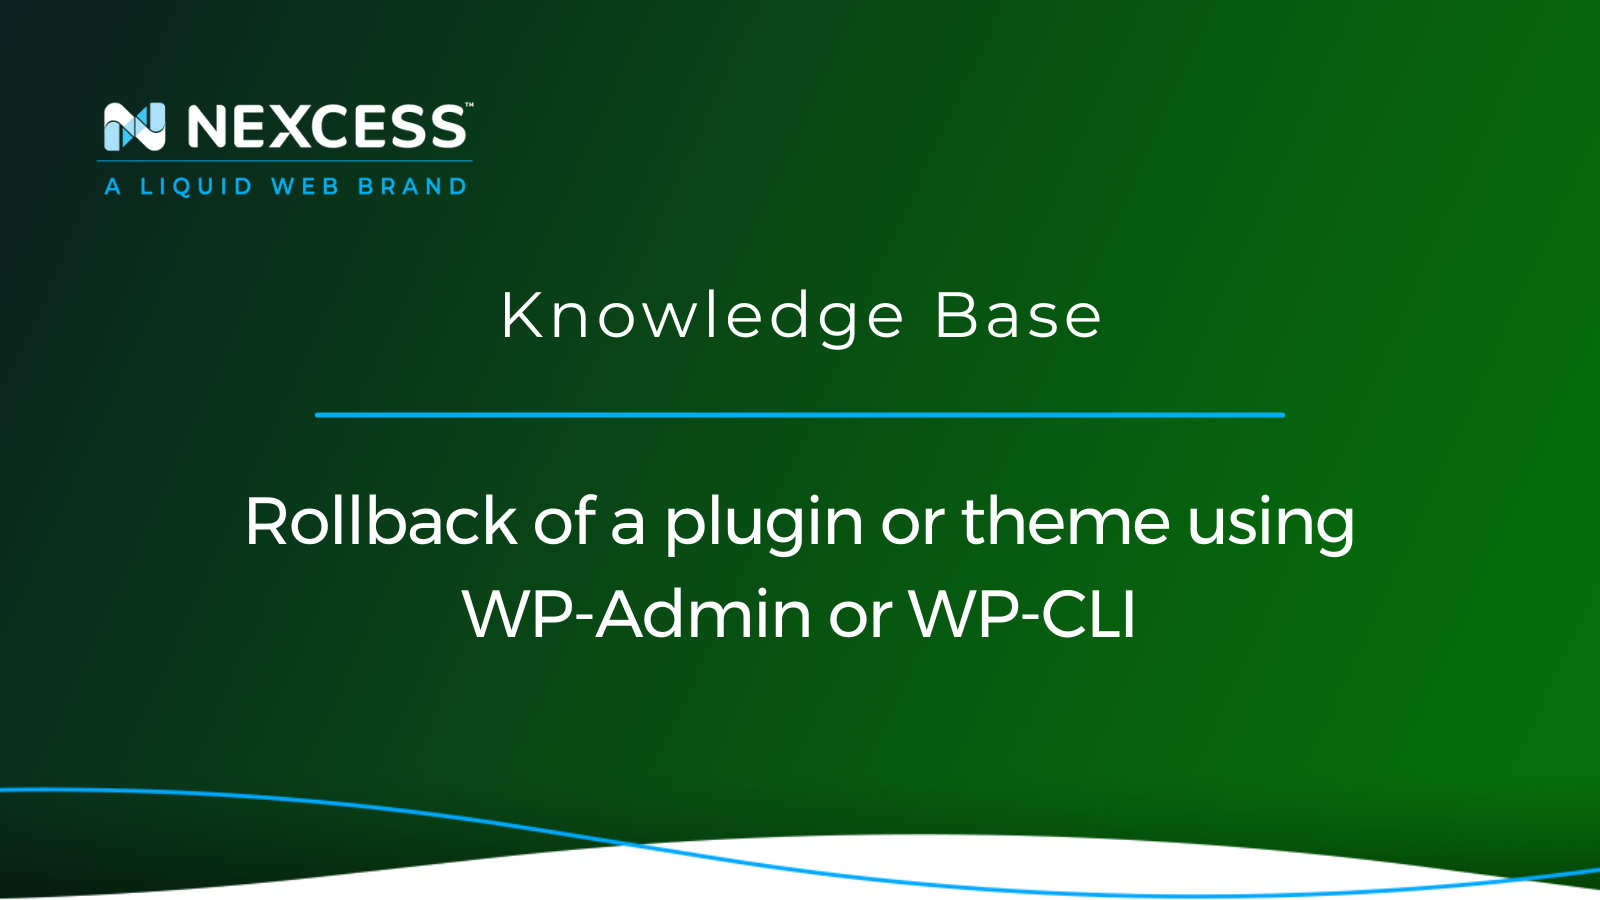 Rollback of a plugin or theme using WP-Admin or WP-CLI